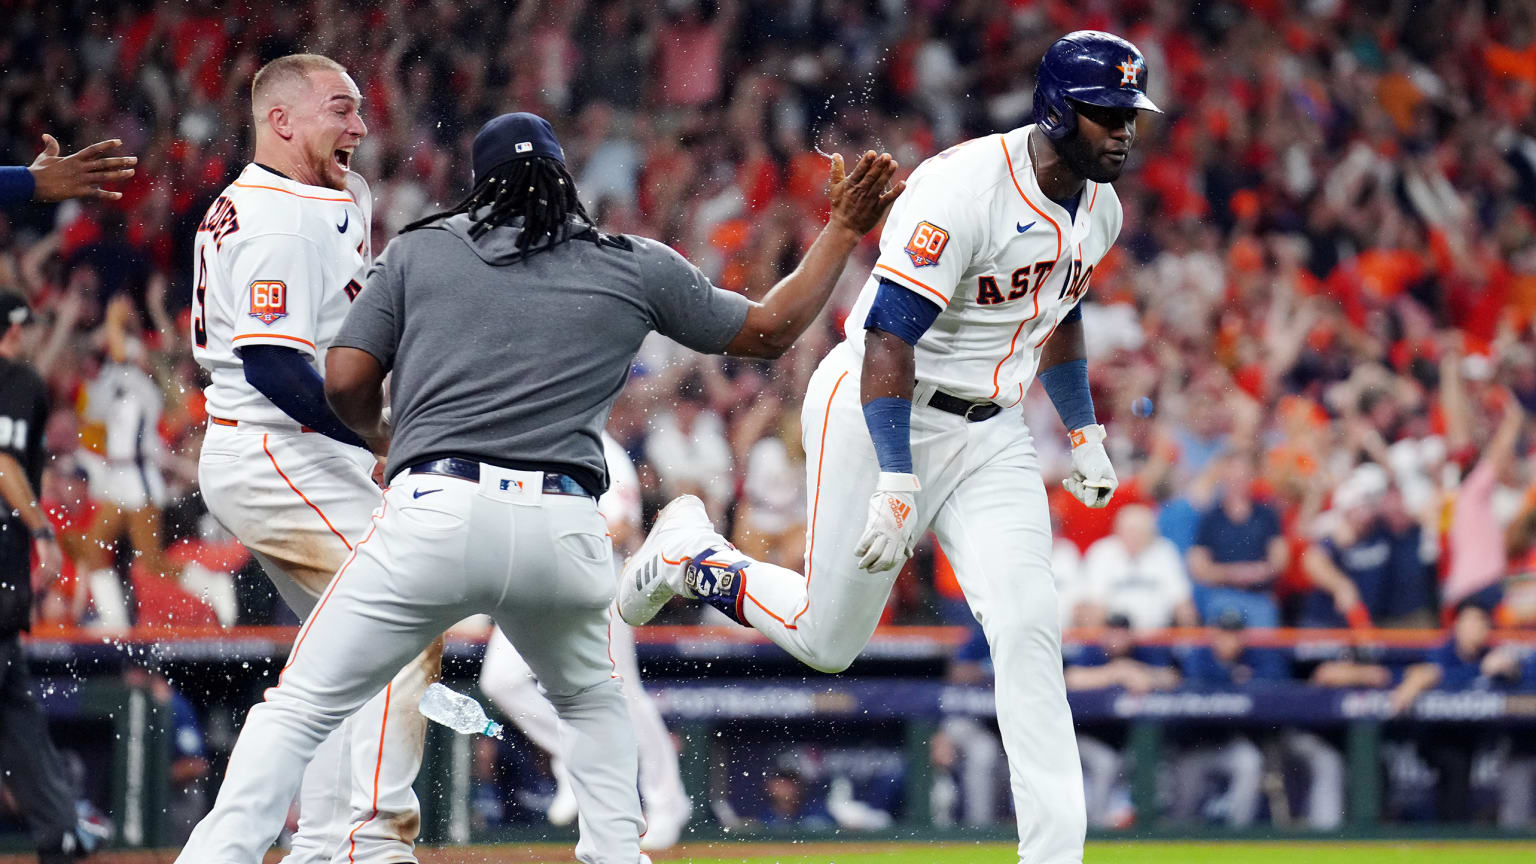 An Astros player runs past two teammates who are celebrating